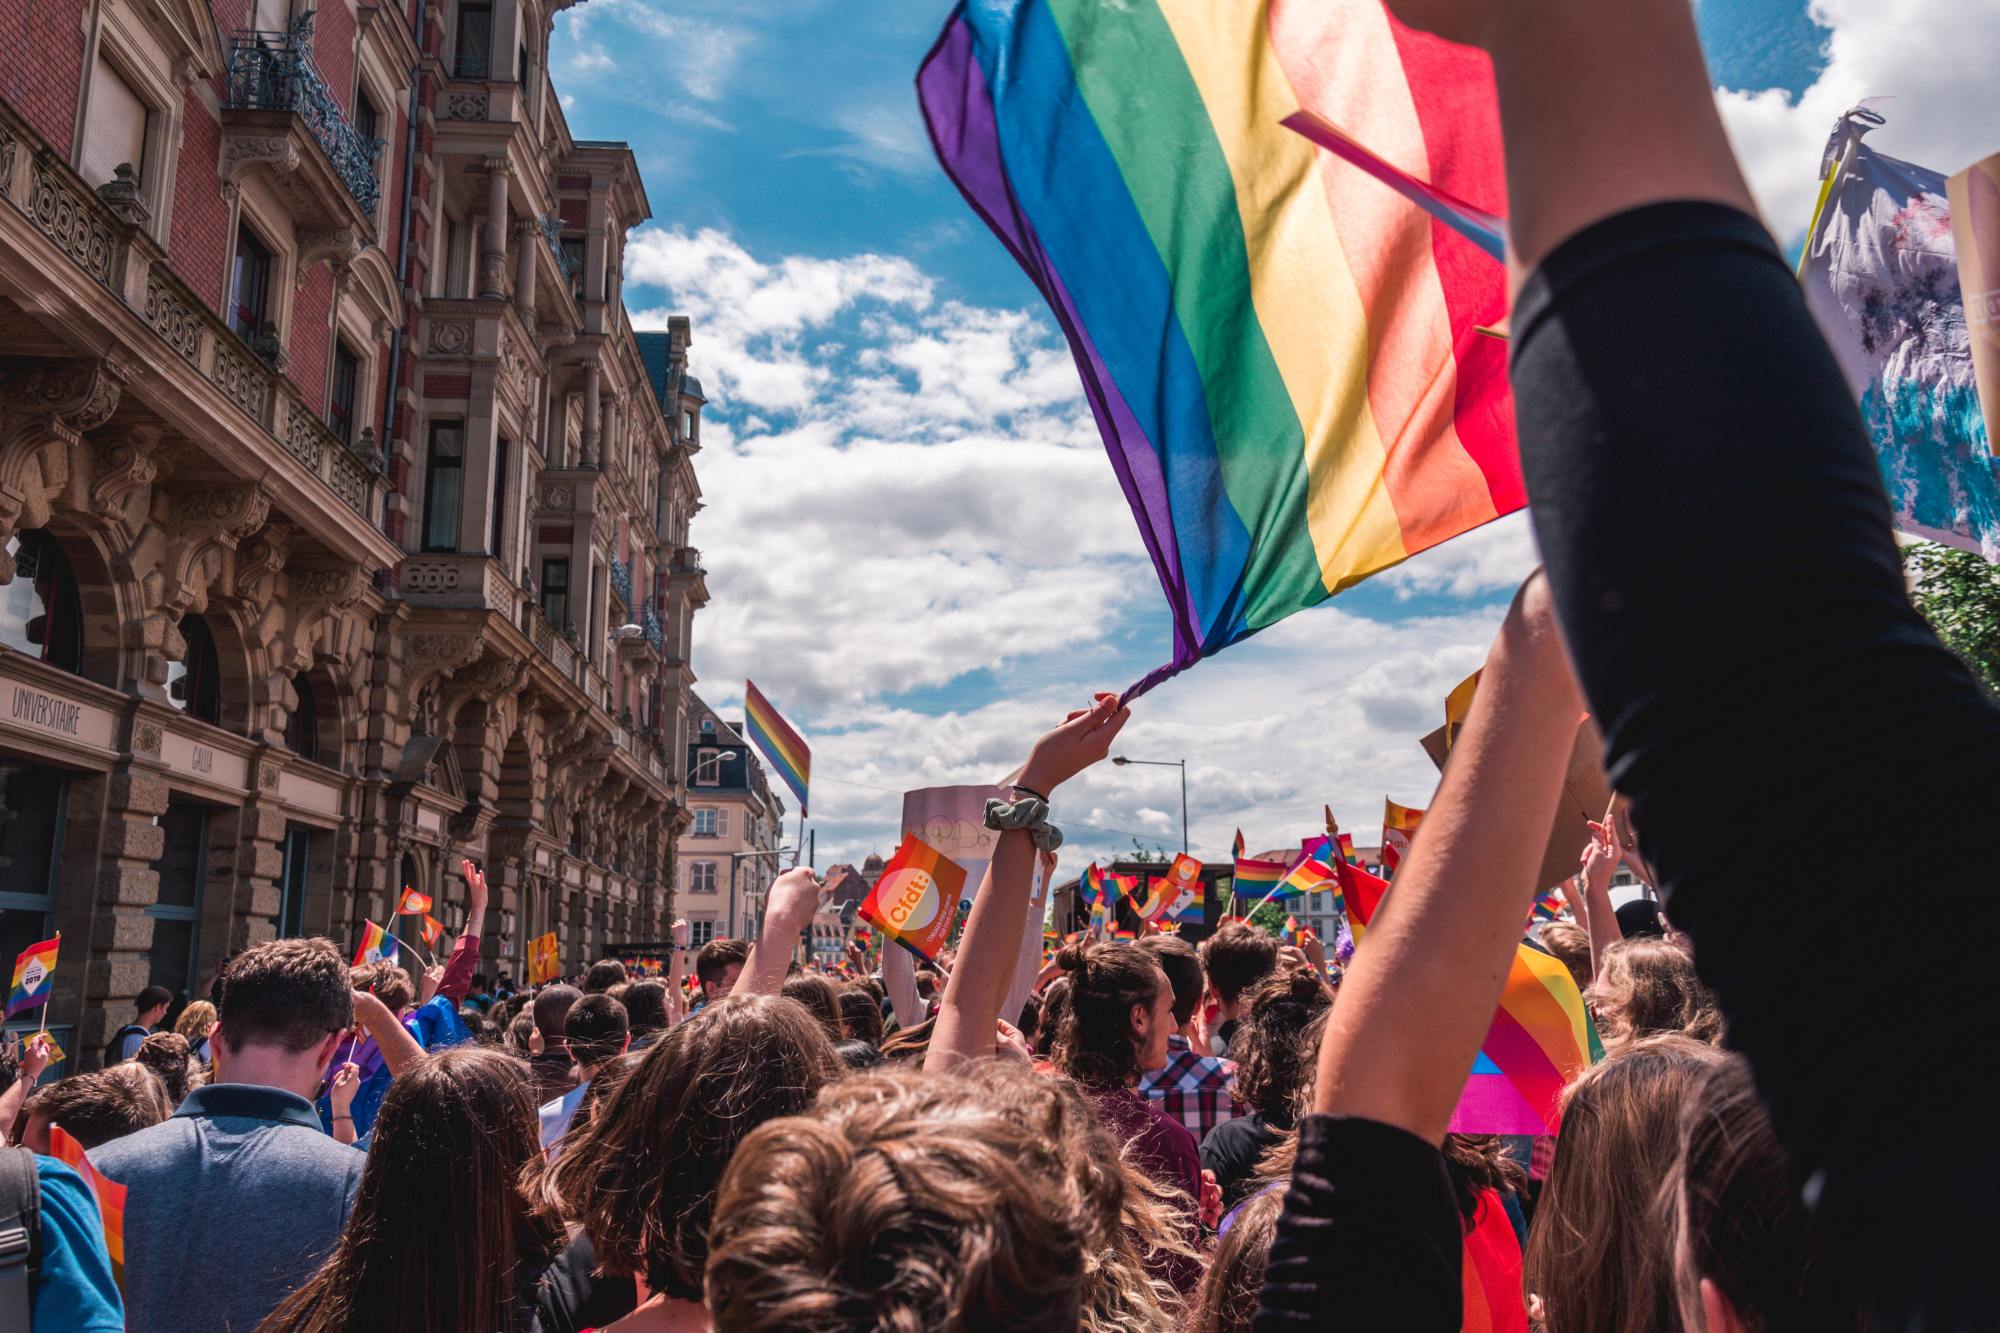 Security Sector to March at London Pride 2022